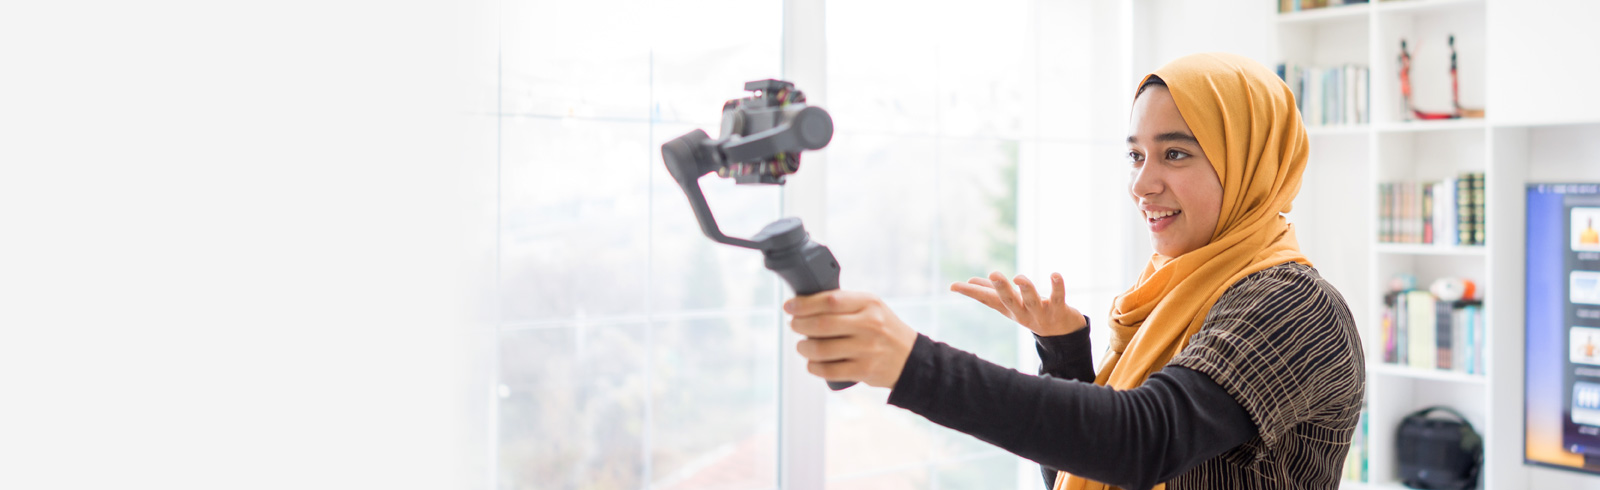 A woman holding a camera stabilizer speakers into the camera